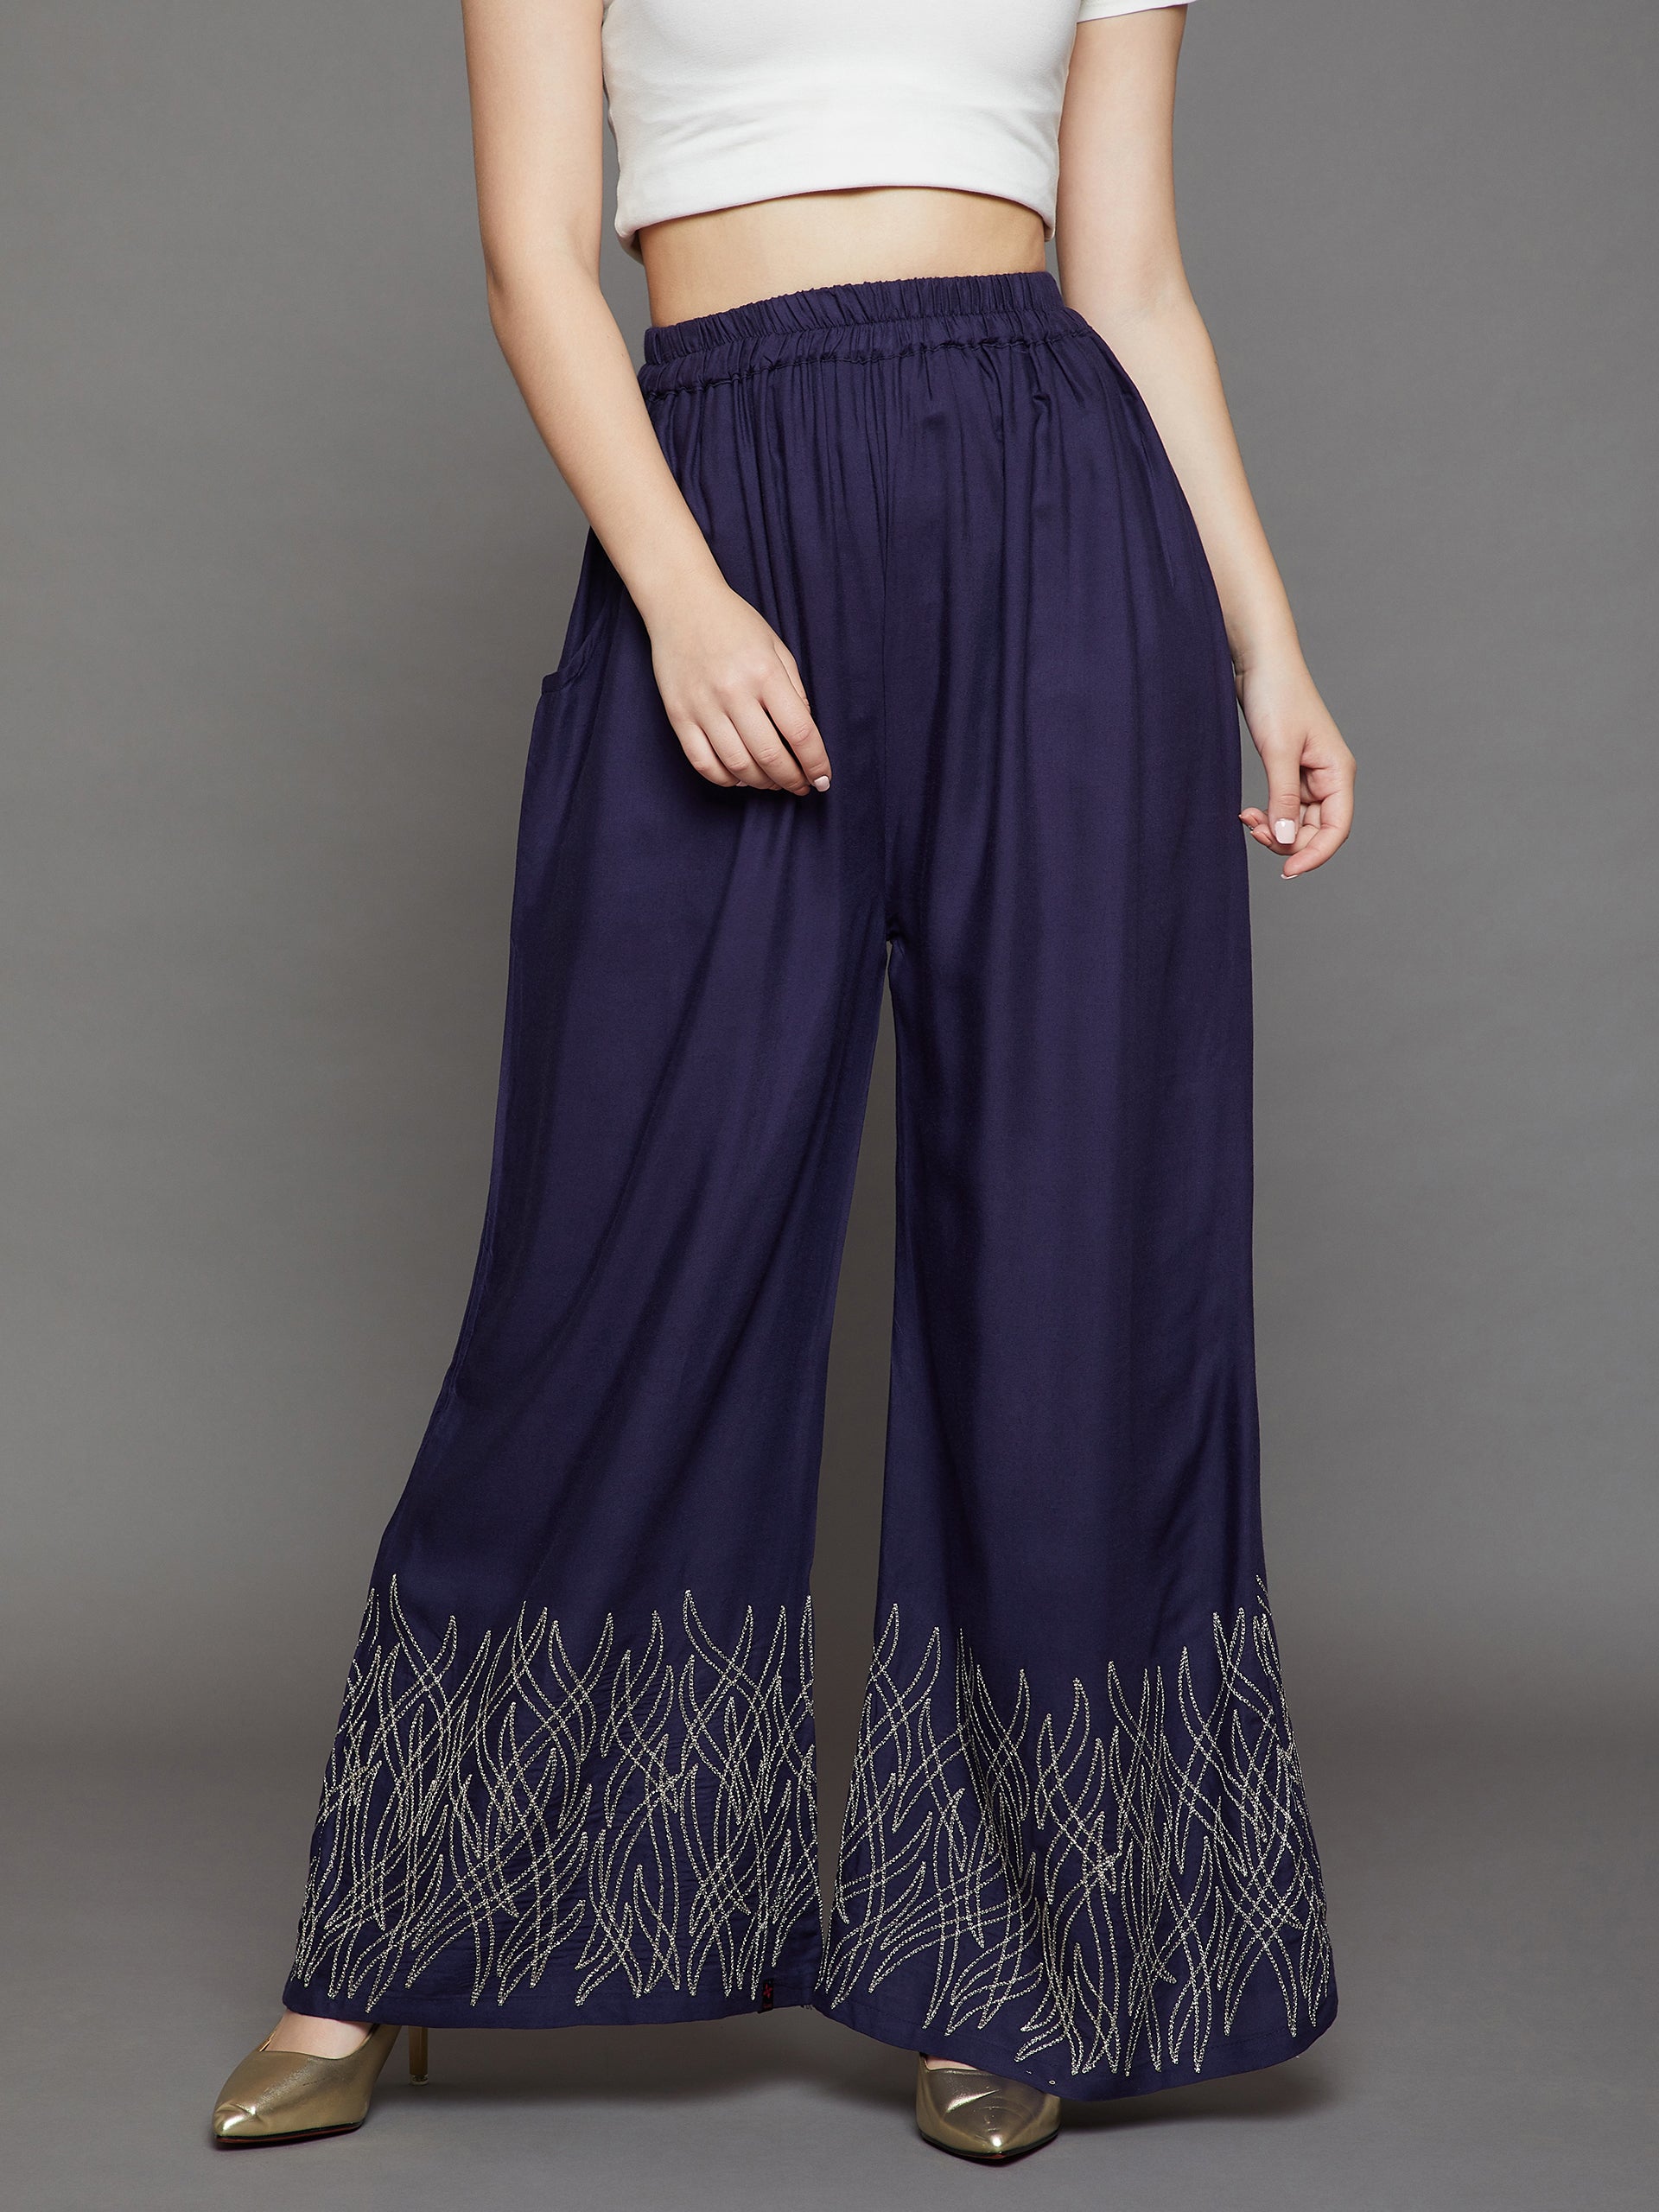 LASTINCH All Sizes Solid Navy Blue Palazzo Pants